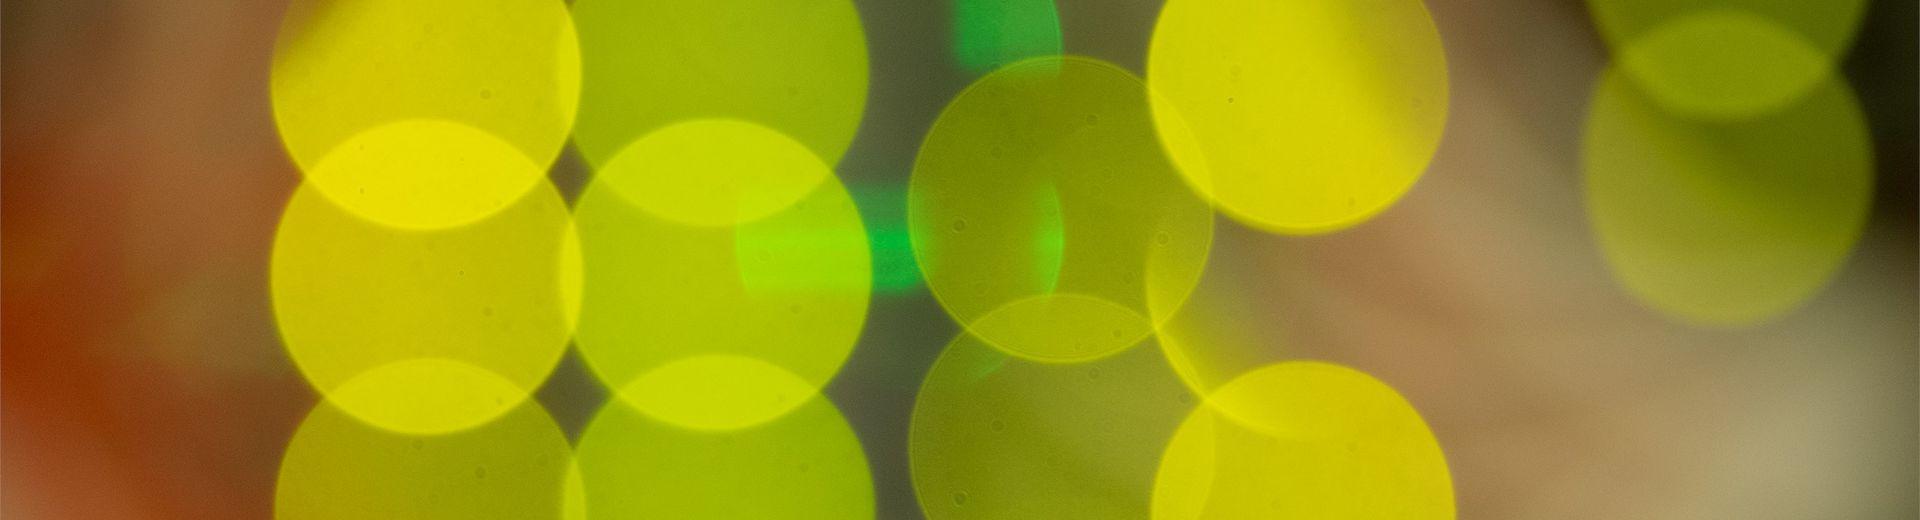 Image is a super close up shot of lights in the back of computer servers resulting in an image of overlapping bright yellow discs of color.